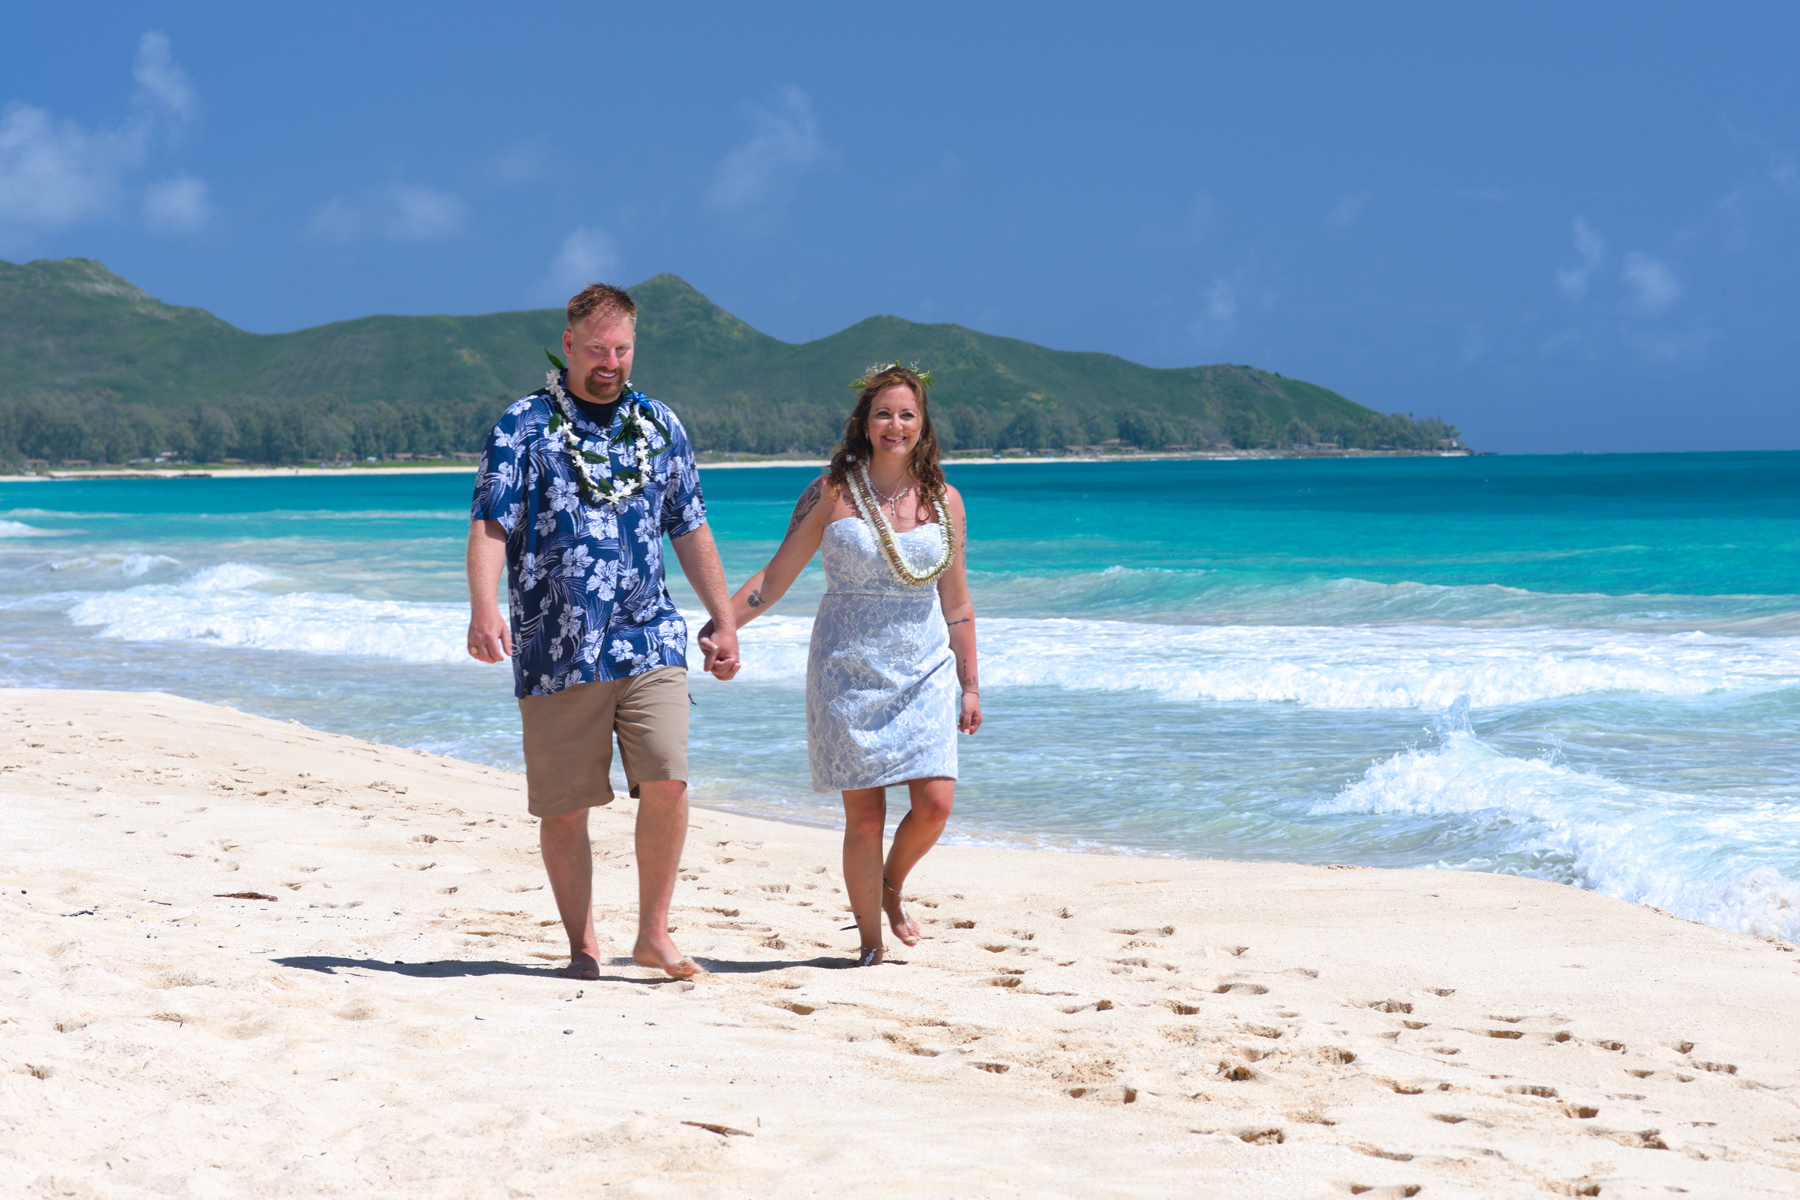 How To Get Married In Honolulu: Wedding Minister All-Inclusive Planning